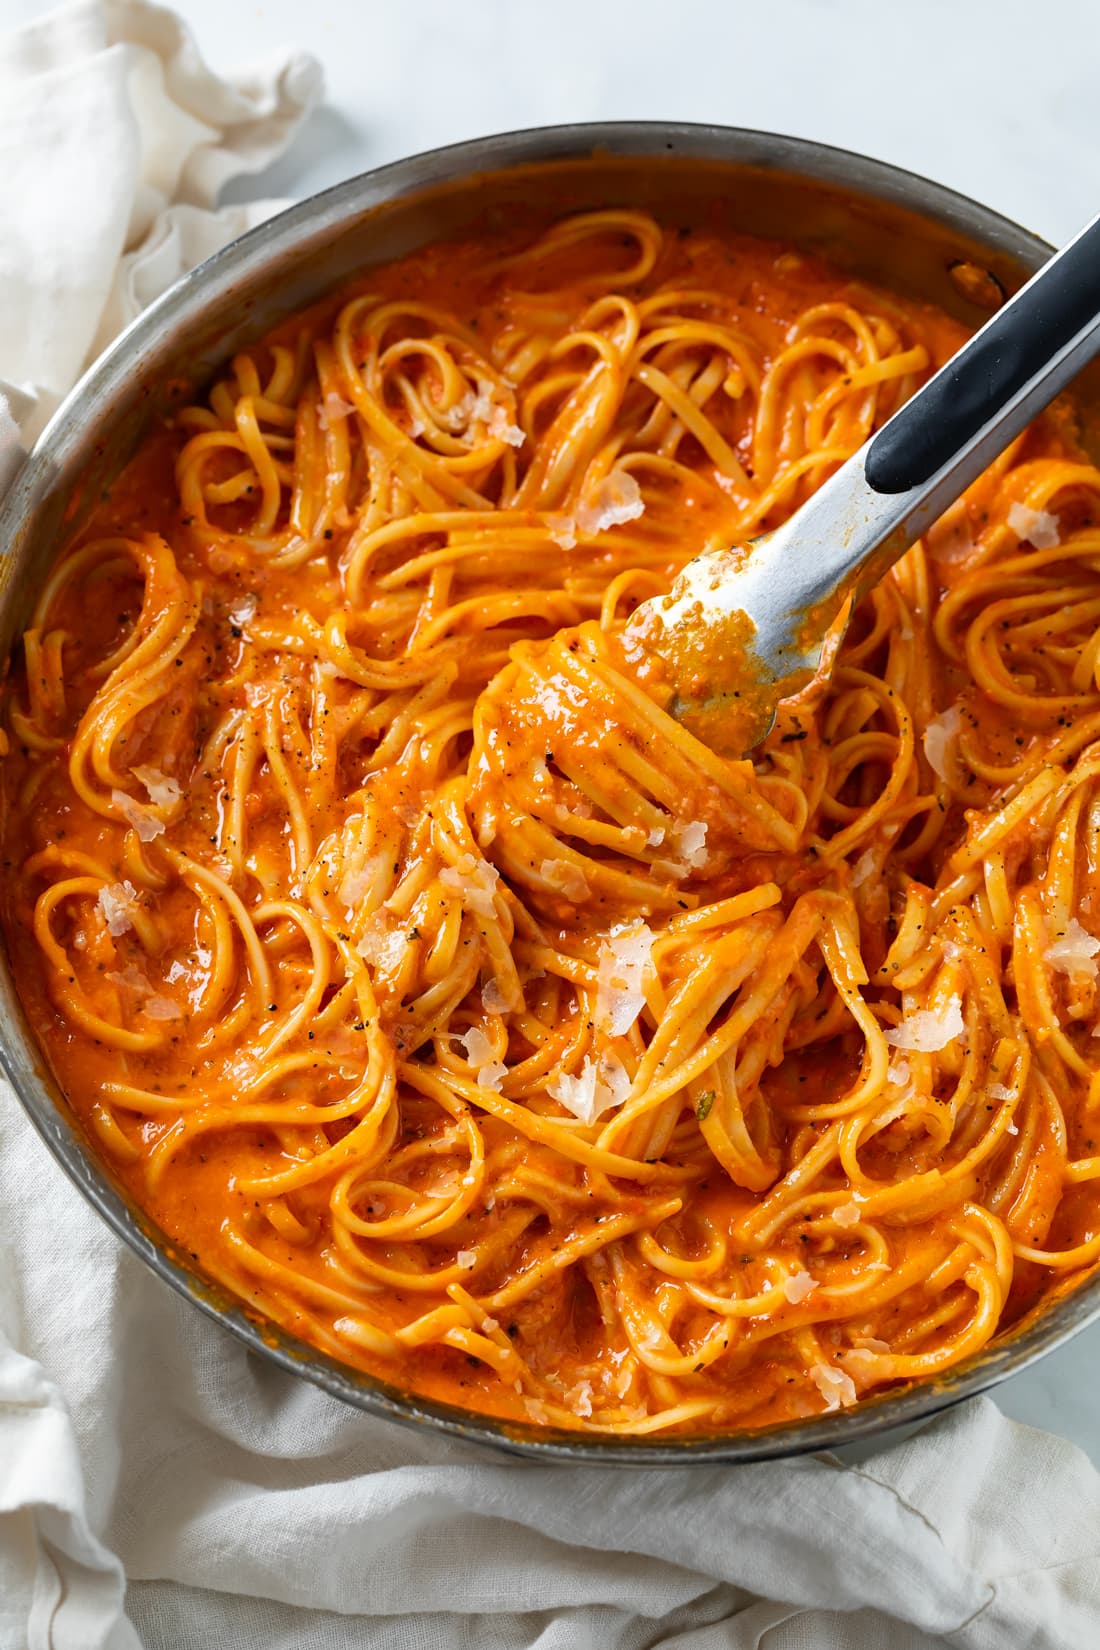 Roasted Red Pepper Pasta in a skillet with kitchen tongs scooping it up.